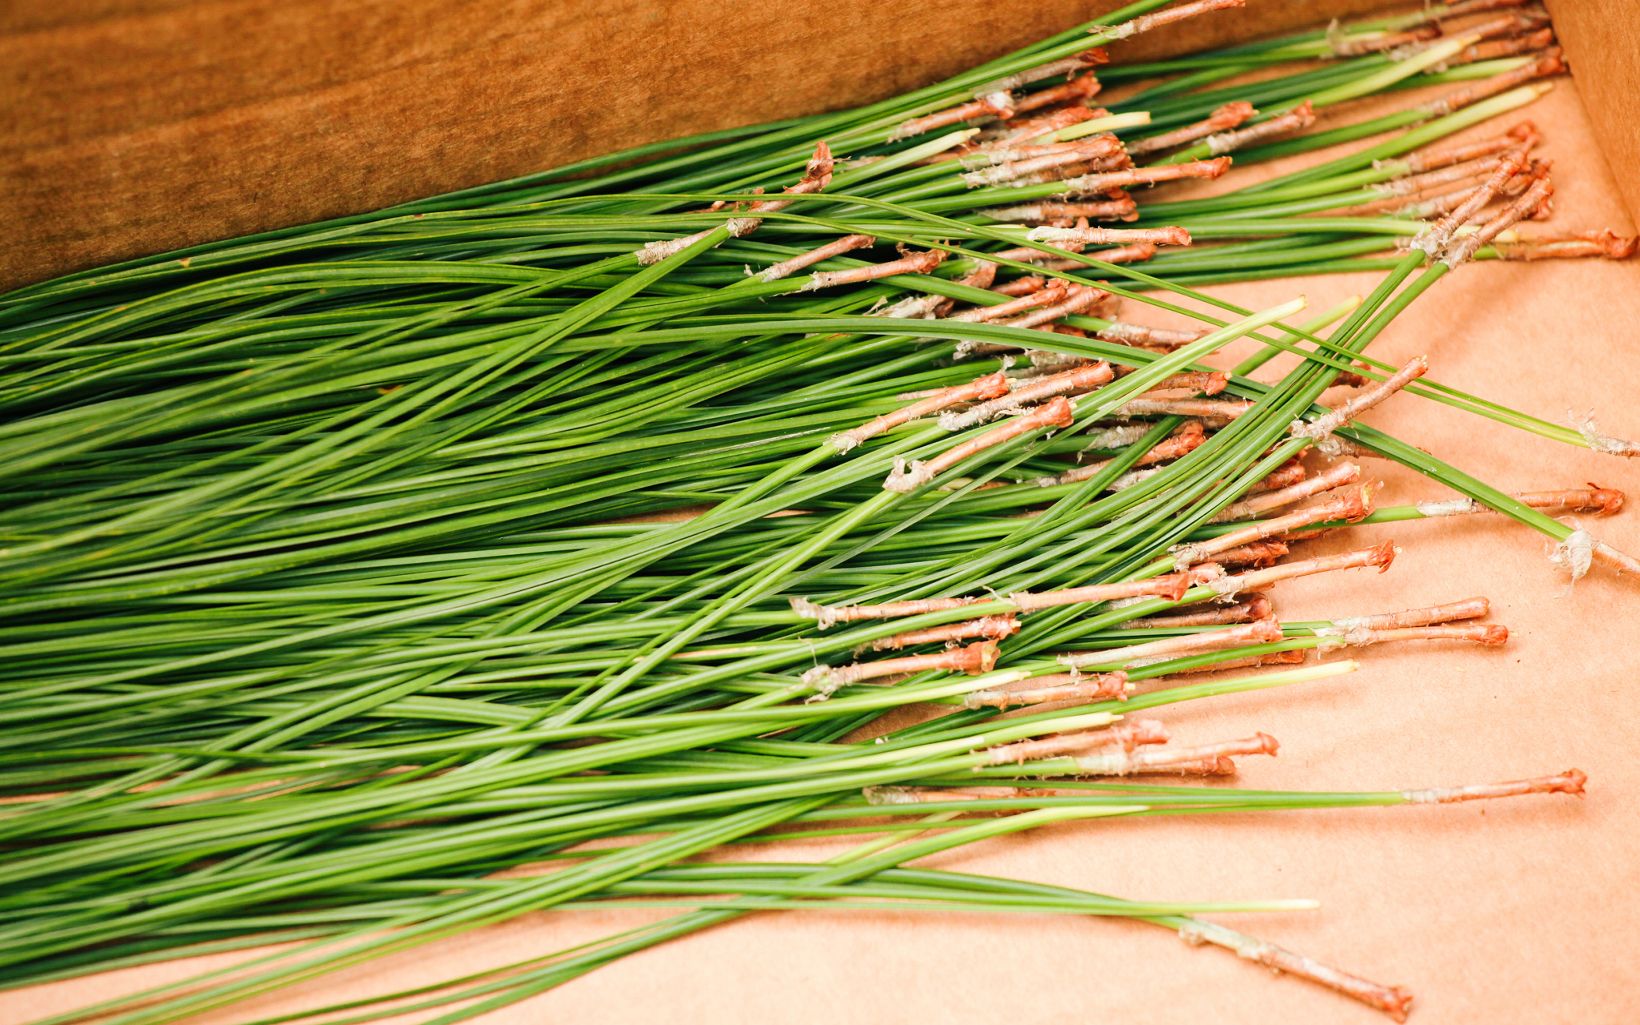 Bright green longleaf needles with brown stems sit in a brown cardboard box.